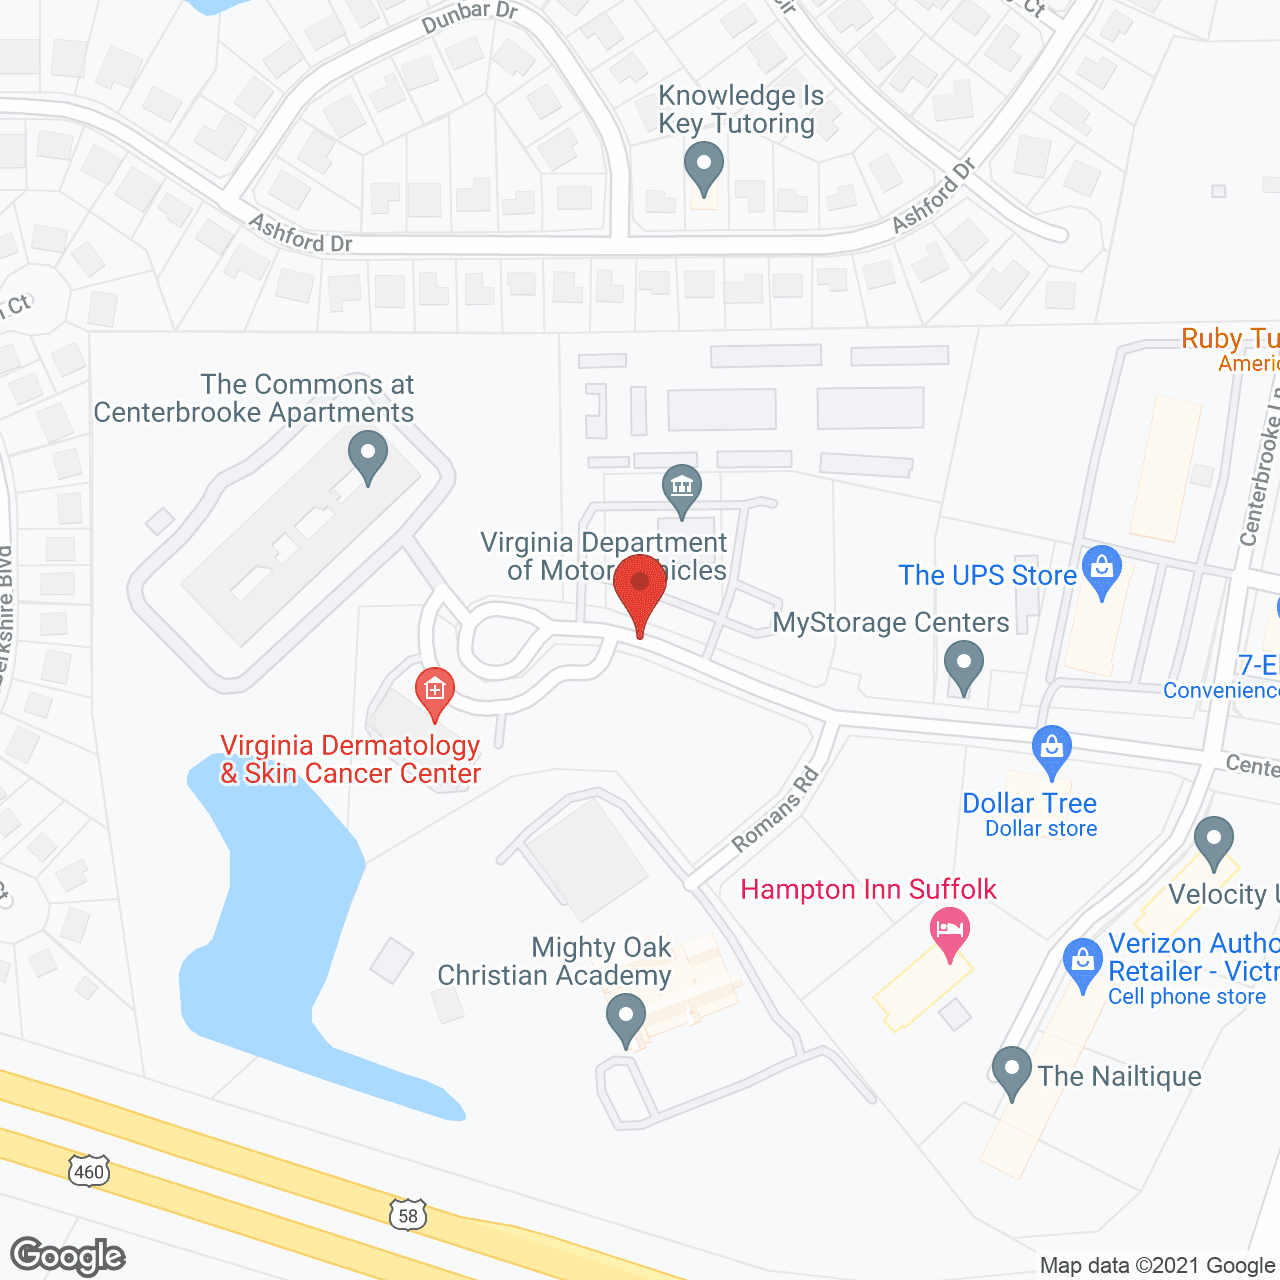 The Commons at Centerbrooke in google map